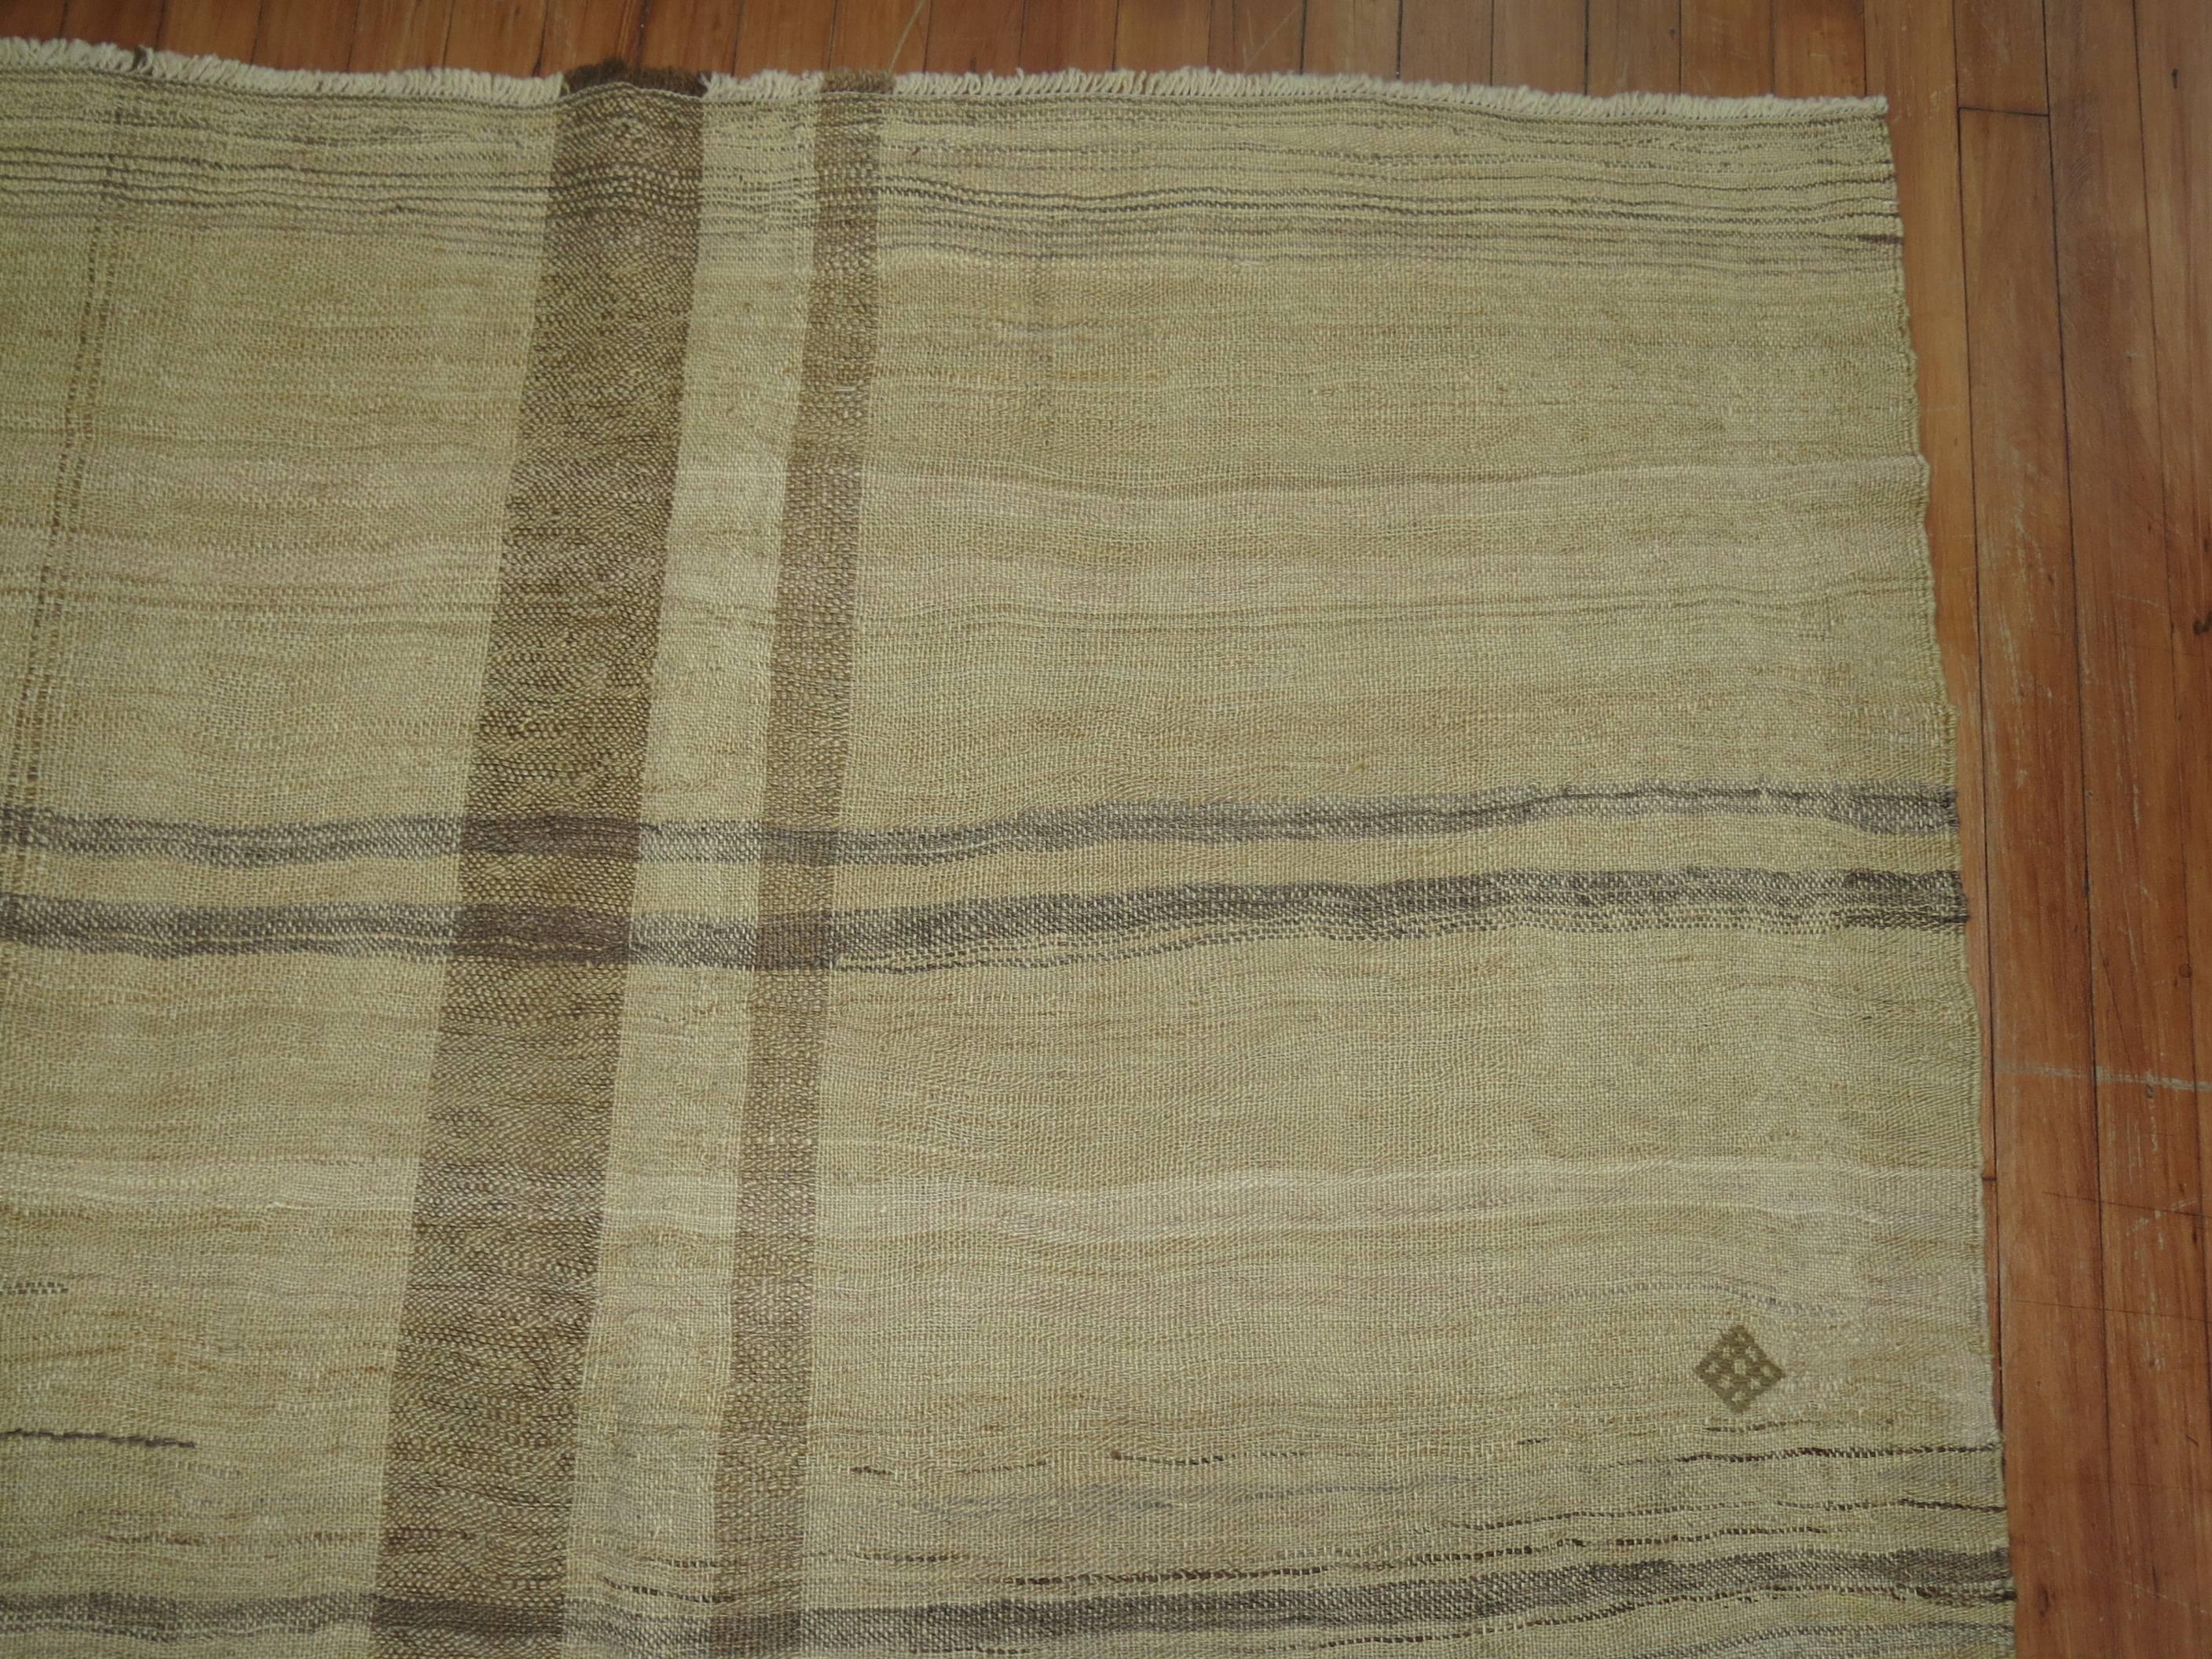 Khaki Brown Minimalist Abstract Turkish Kilim Flat-Weave In Good Condition For Sale In New York, NY